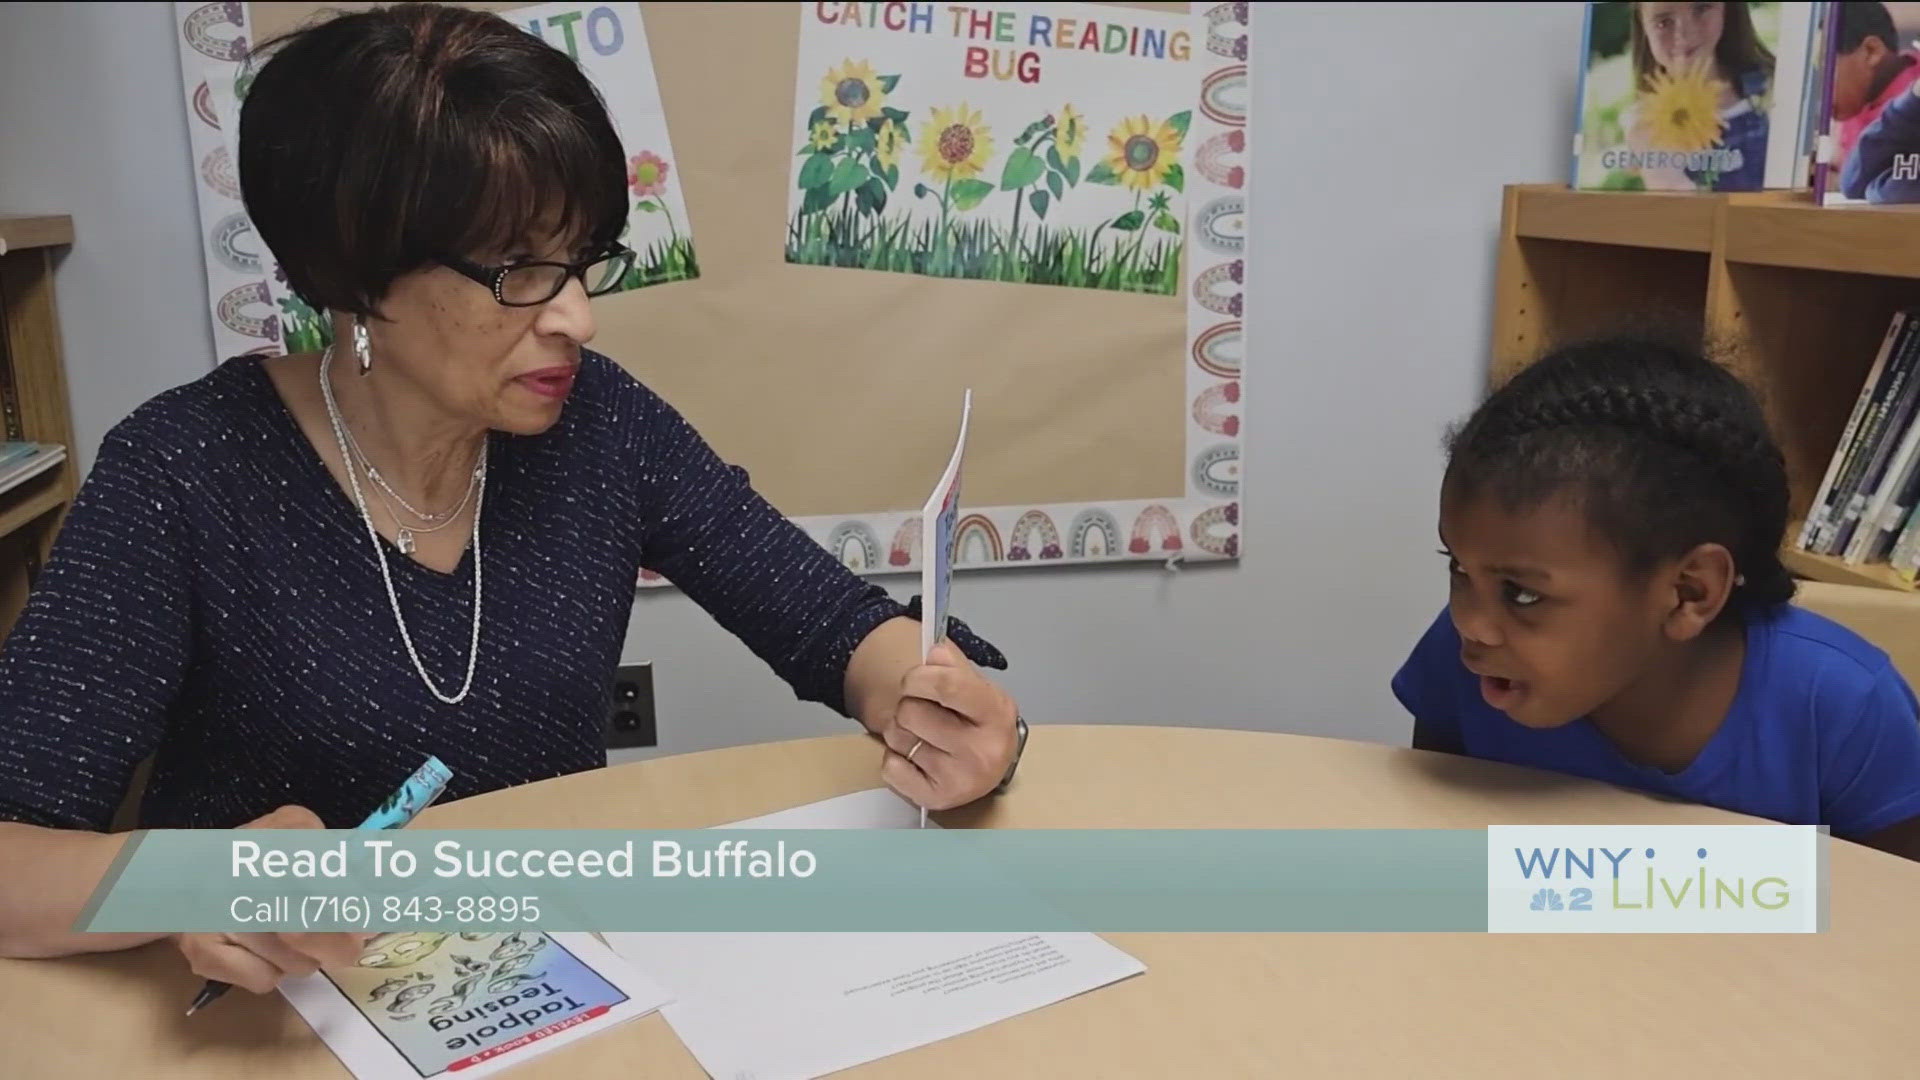 Sat 4/20 Read To Succeed Buffalo (THIS VIDEO IS SPONSORED BY READ TO SUCCEED BUFFALO)